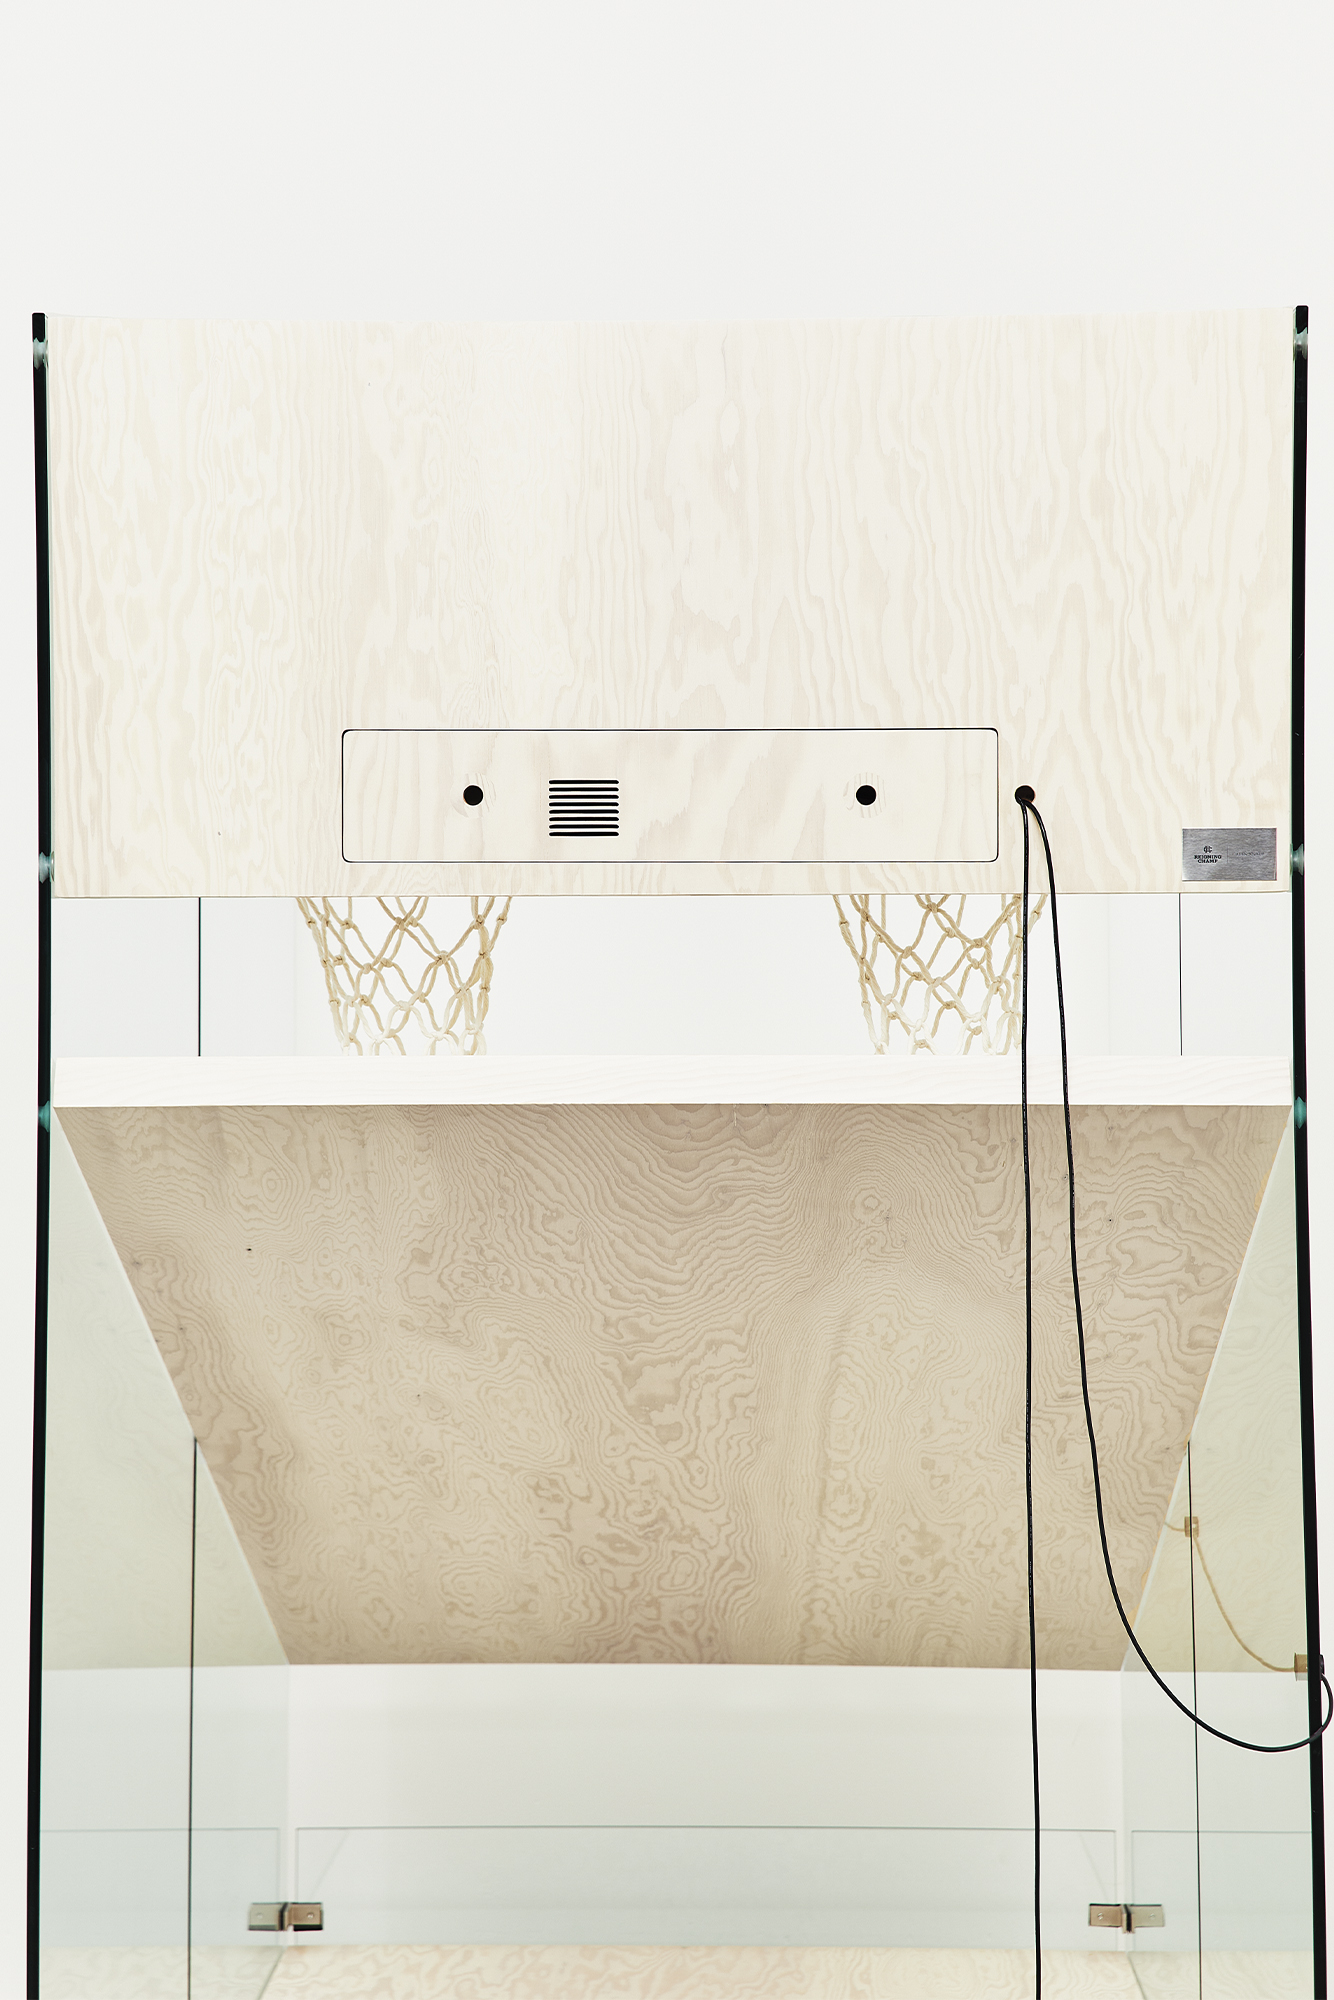 reigning champ home court book for men